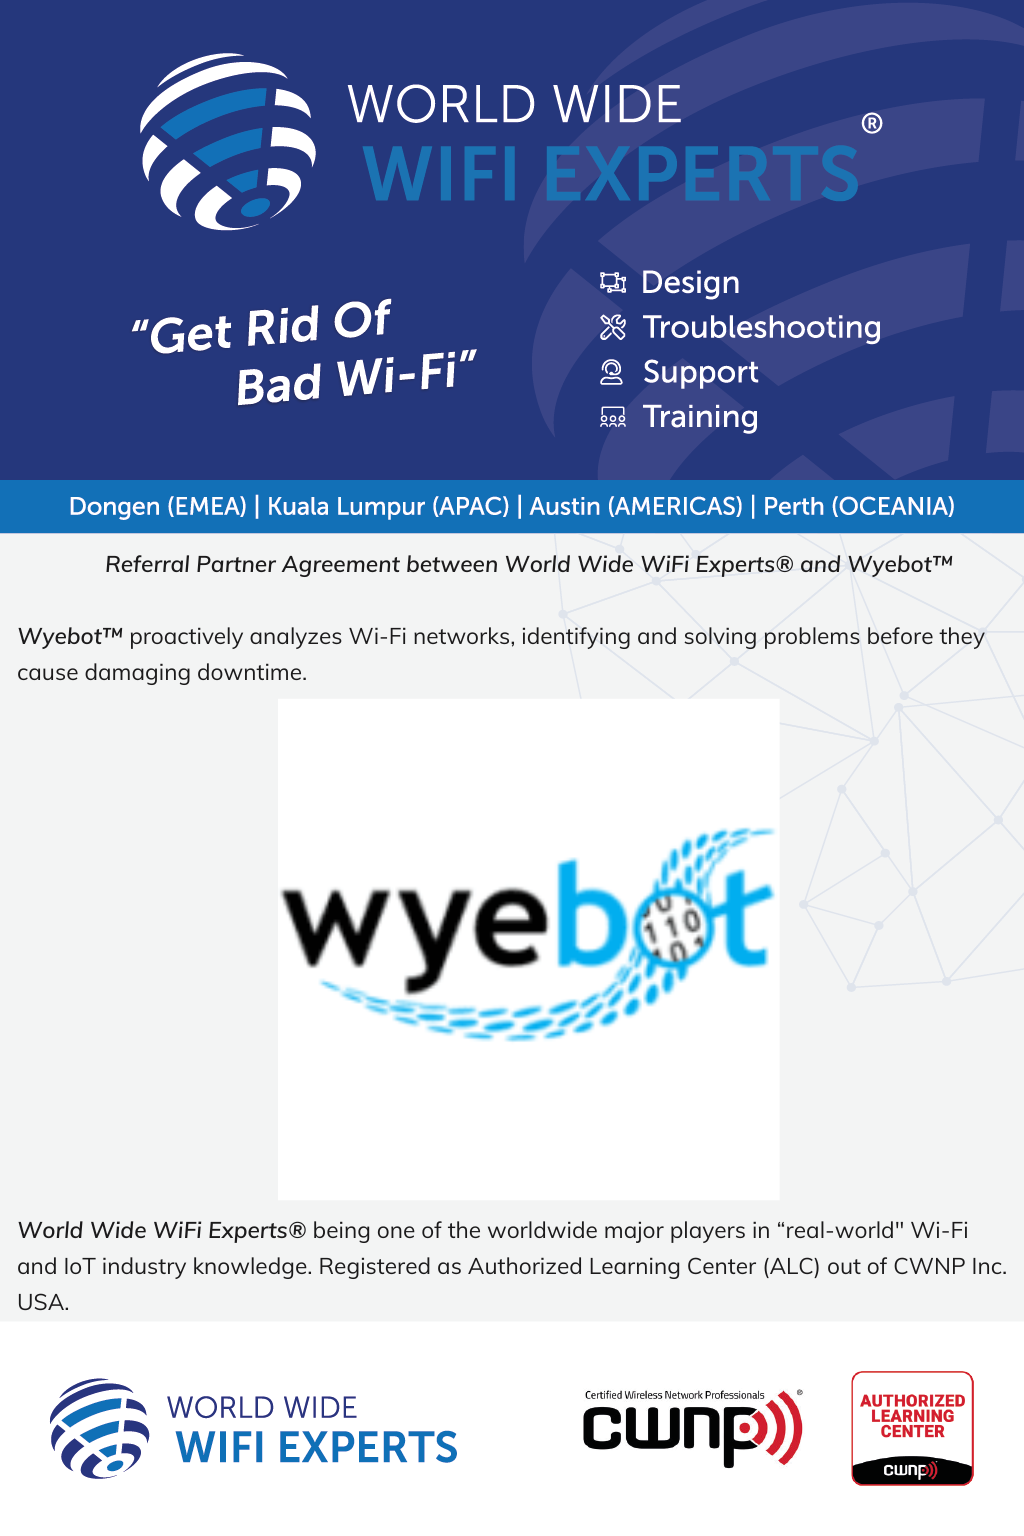 Referral Partner Agreement between Wyebot and World Wide WiFi Experts